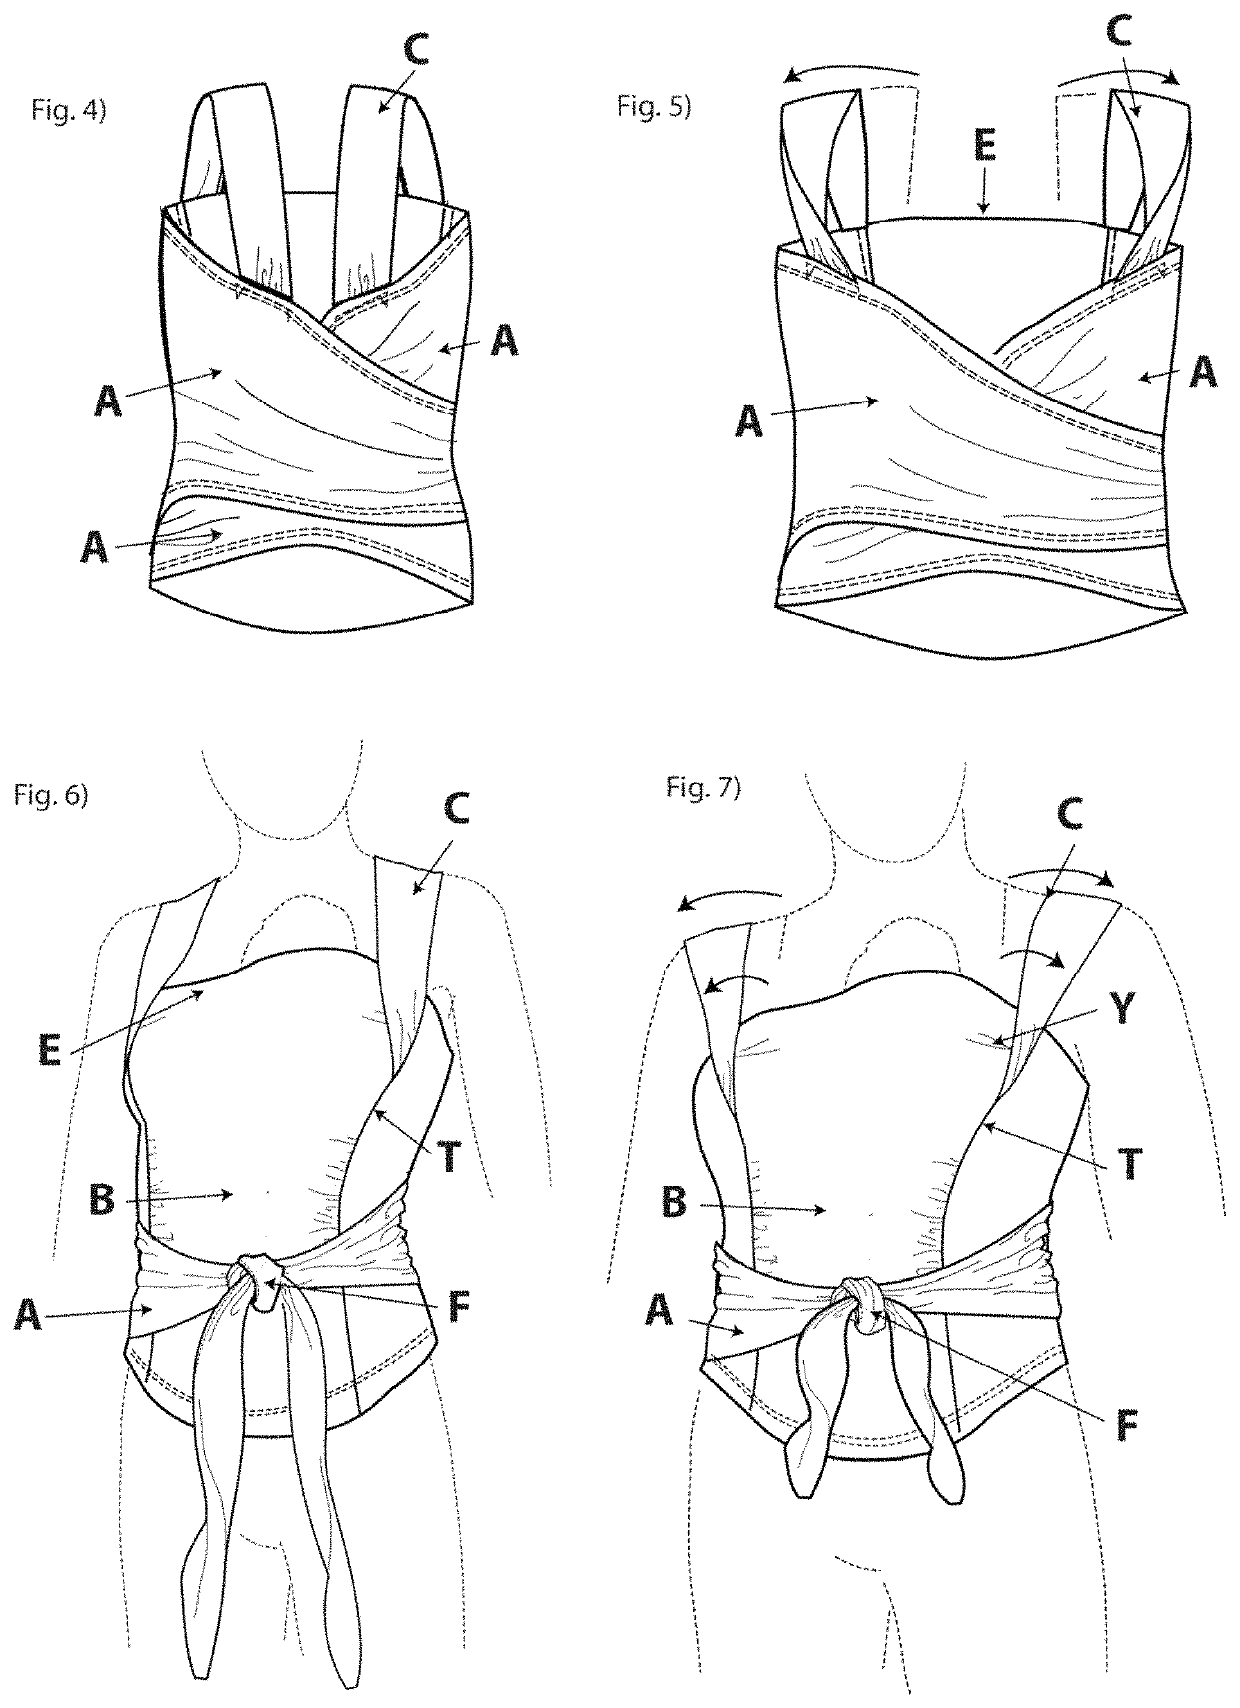 Undergarment for carrying a baby skin-to-skin